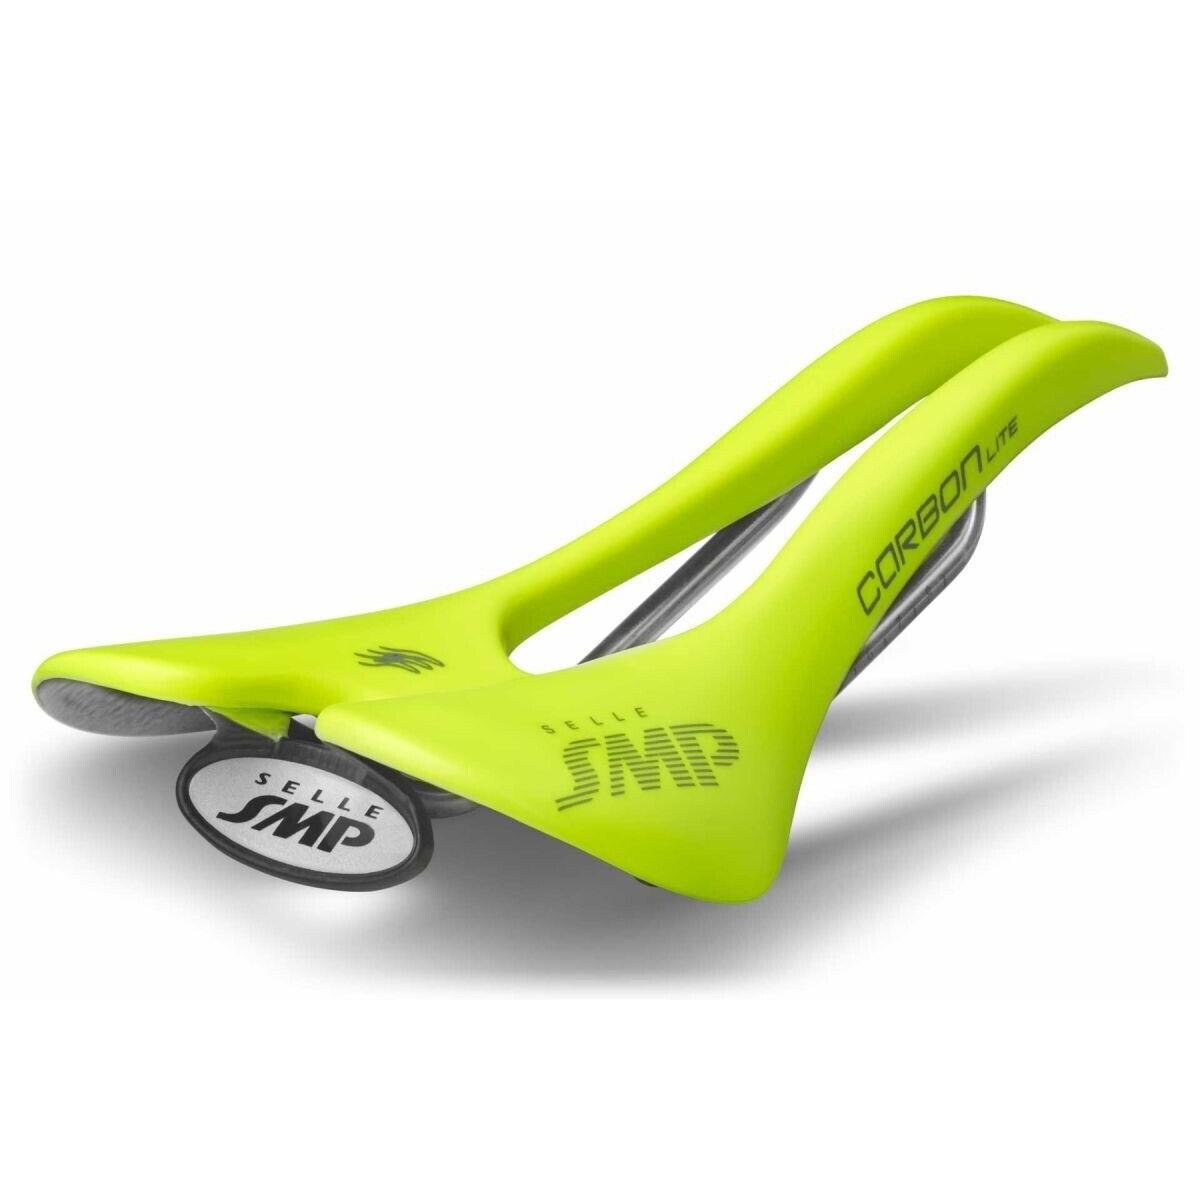 Selle Smp Carbon Lite Saddle Yellow Fluo Made IN Italy 185g - Yellow Fluo